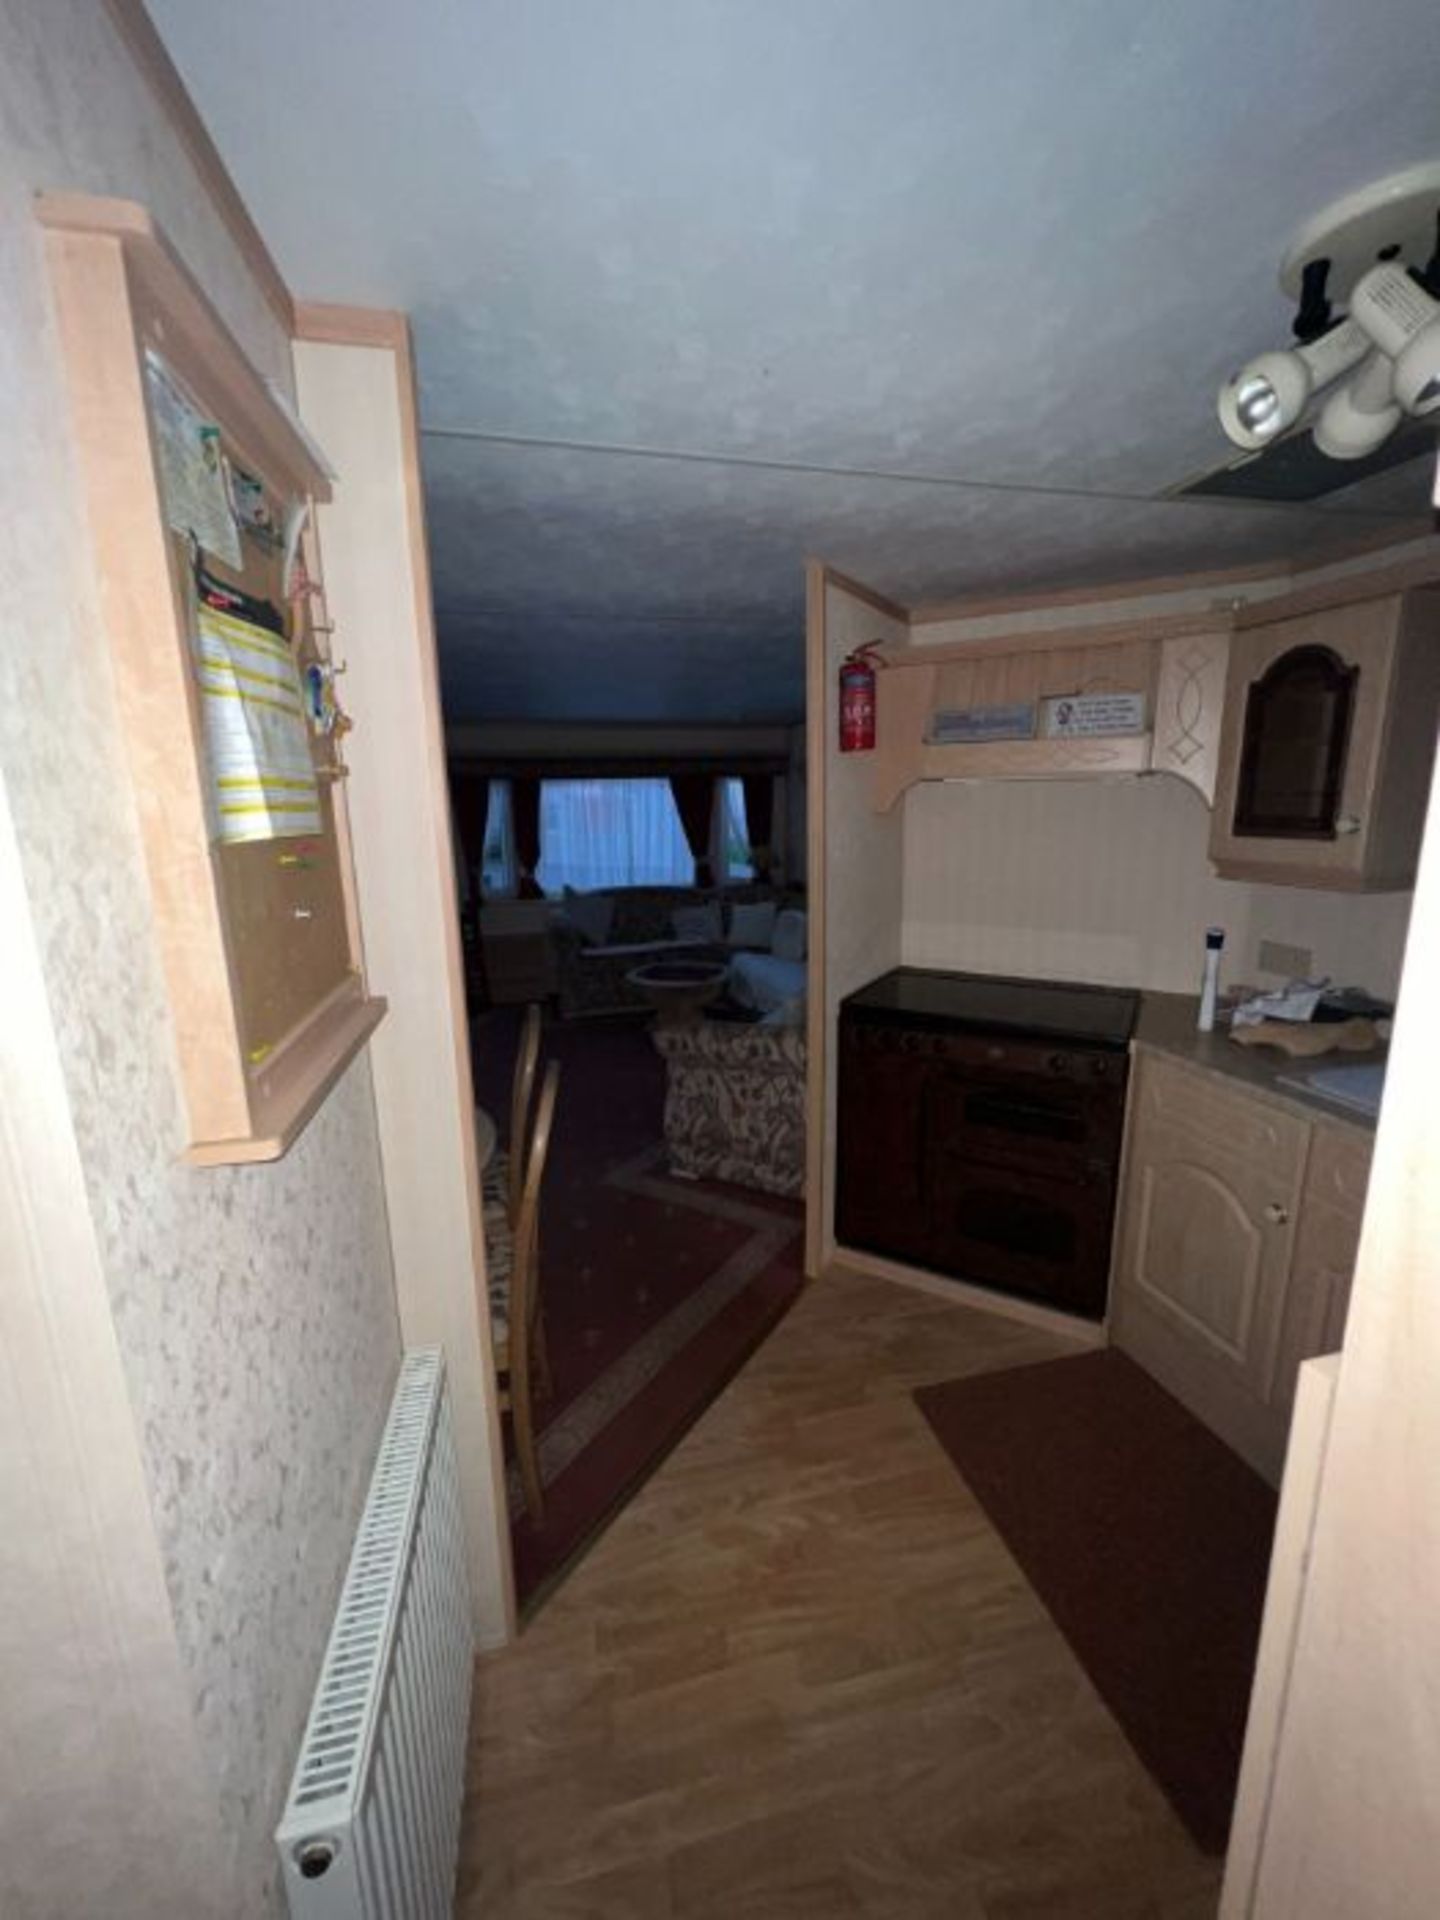 WILLERBY LYNDHURST 37FT X 12FT, 2 BEDROOM STATIC CARAVAN DOUBLE GLAZED & CENTRAL HEATING - LOCATED - Image 12 of 50